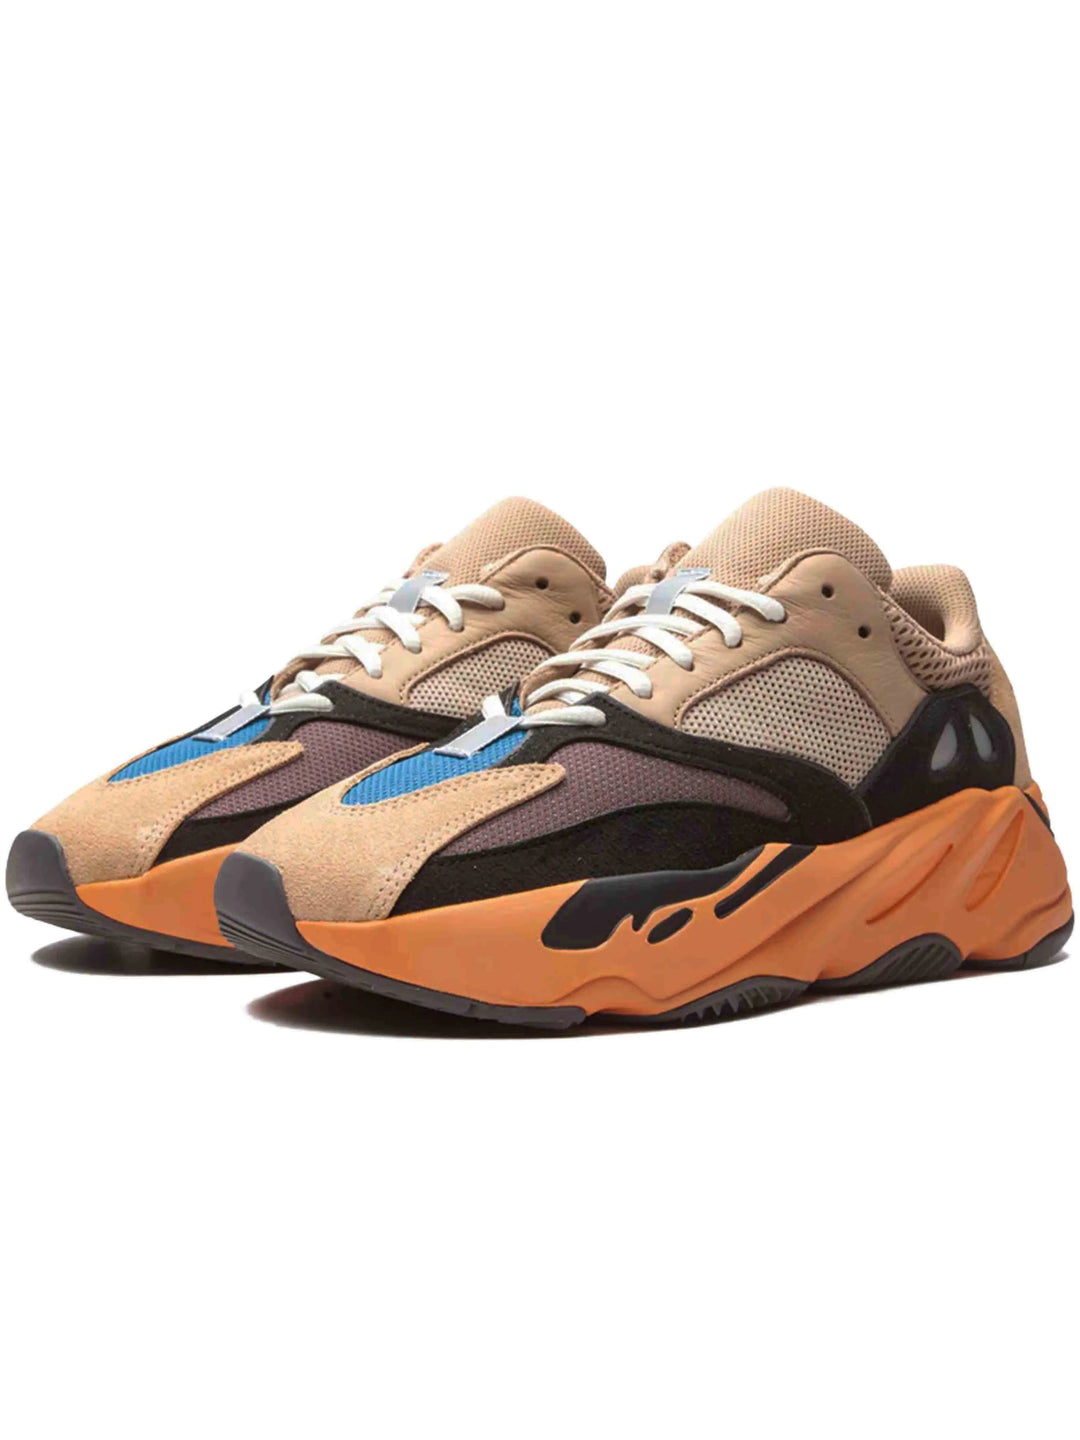 Adidas Yeezy Boost 700 Enflame Amber Prior